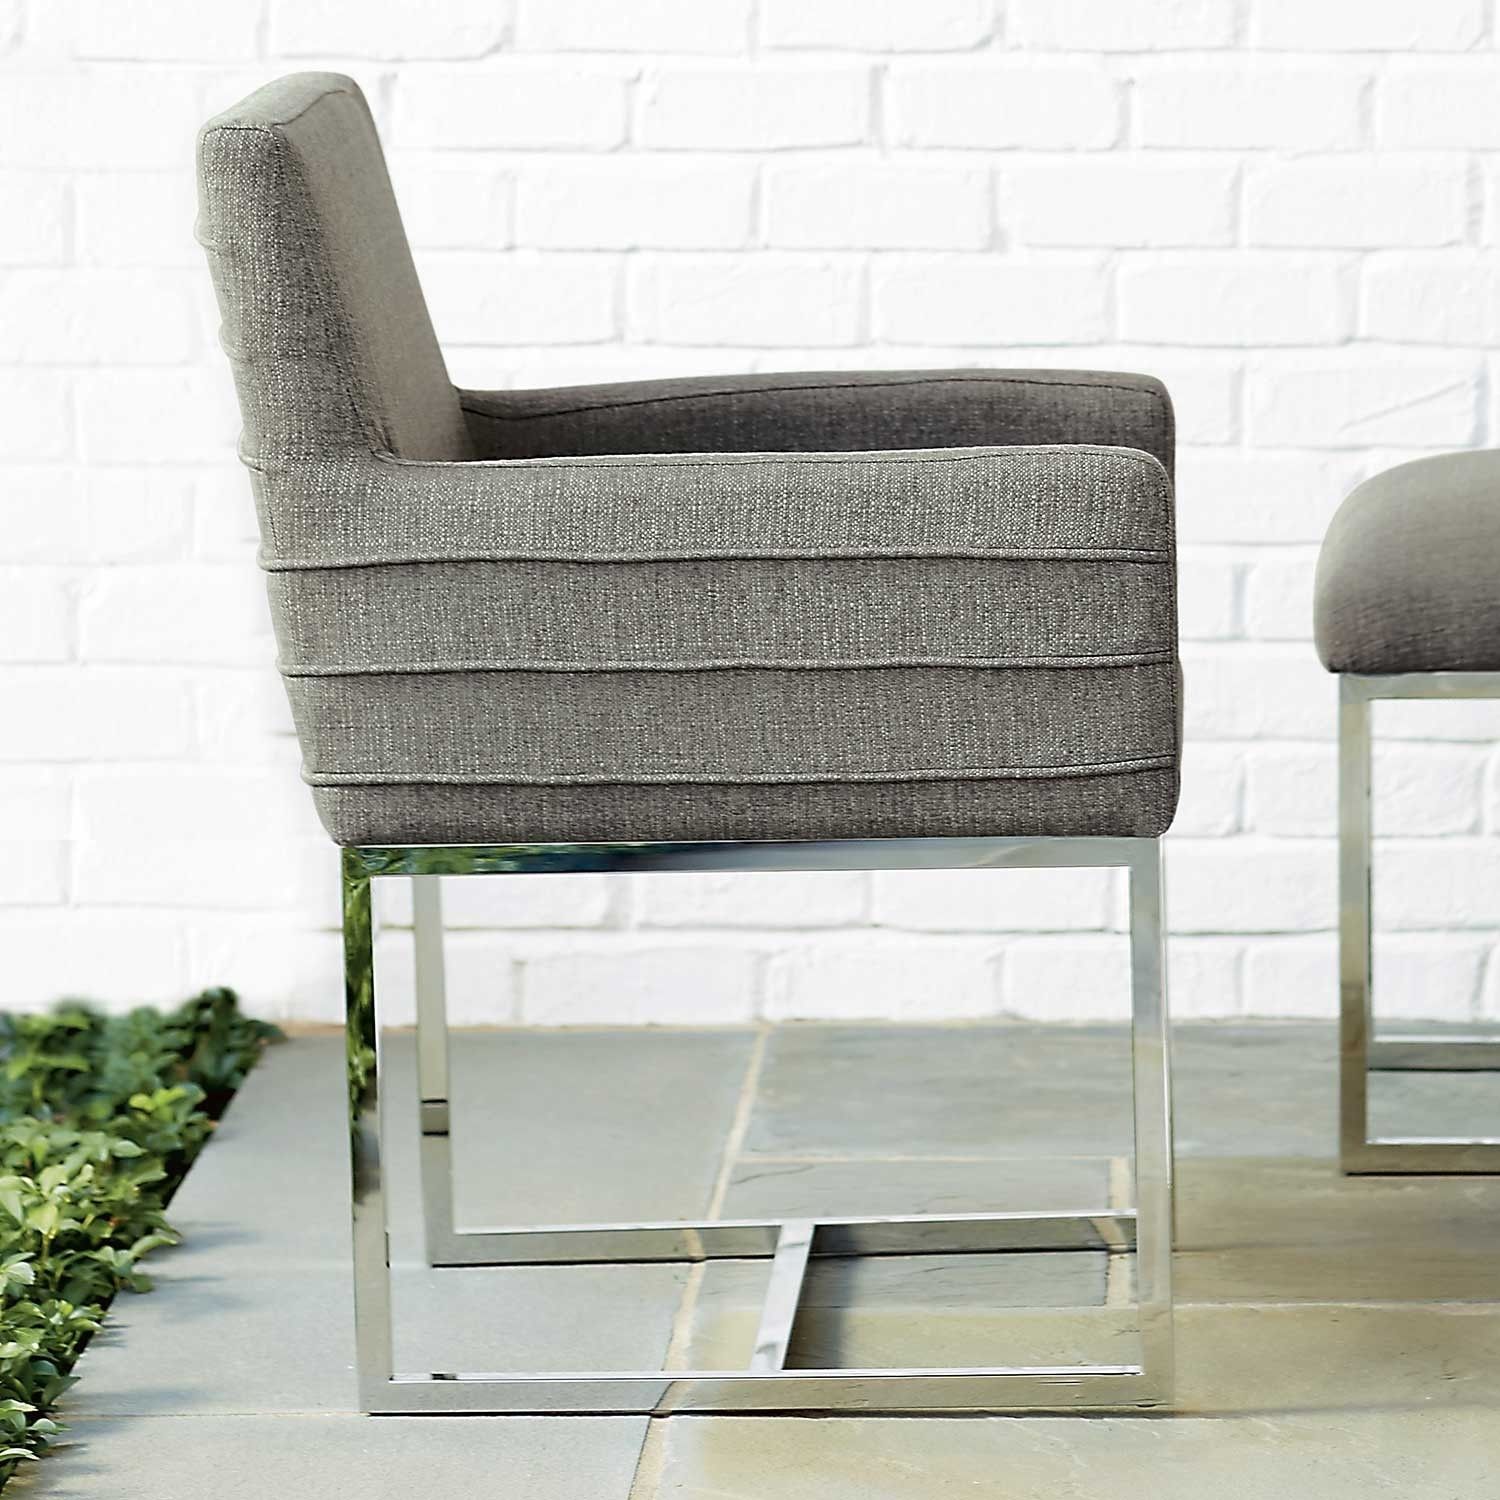 Well Liked Cooper Upholstered Side Chairs Regarding Zephyr Cooper Stainless Steel & Upholstered Arm Chair In Dark Gray (View 5 of 20)